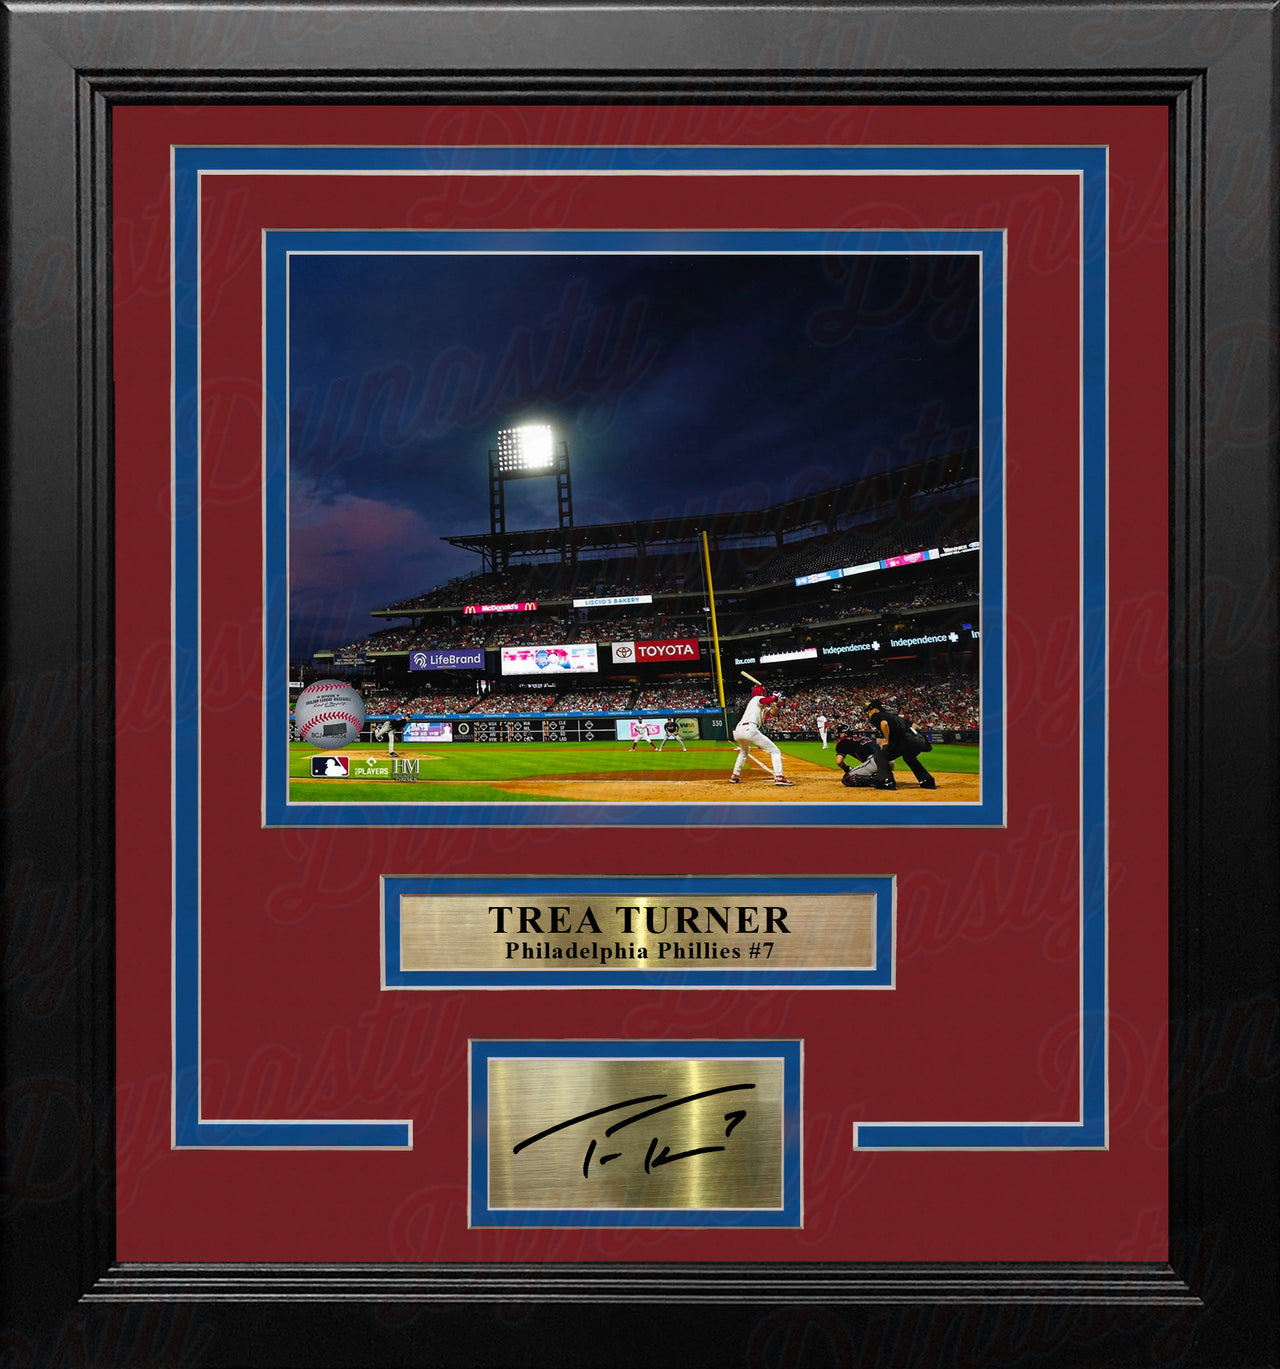 Trea Turner Night at the Bank Philadelphia Phillies 8" x 10" Framed Photo with Engraved Autograph